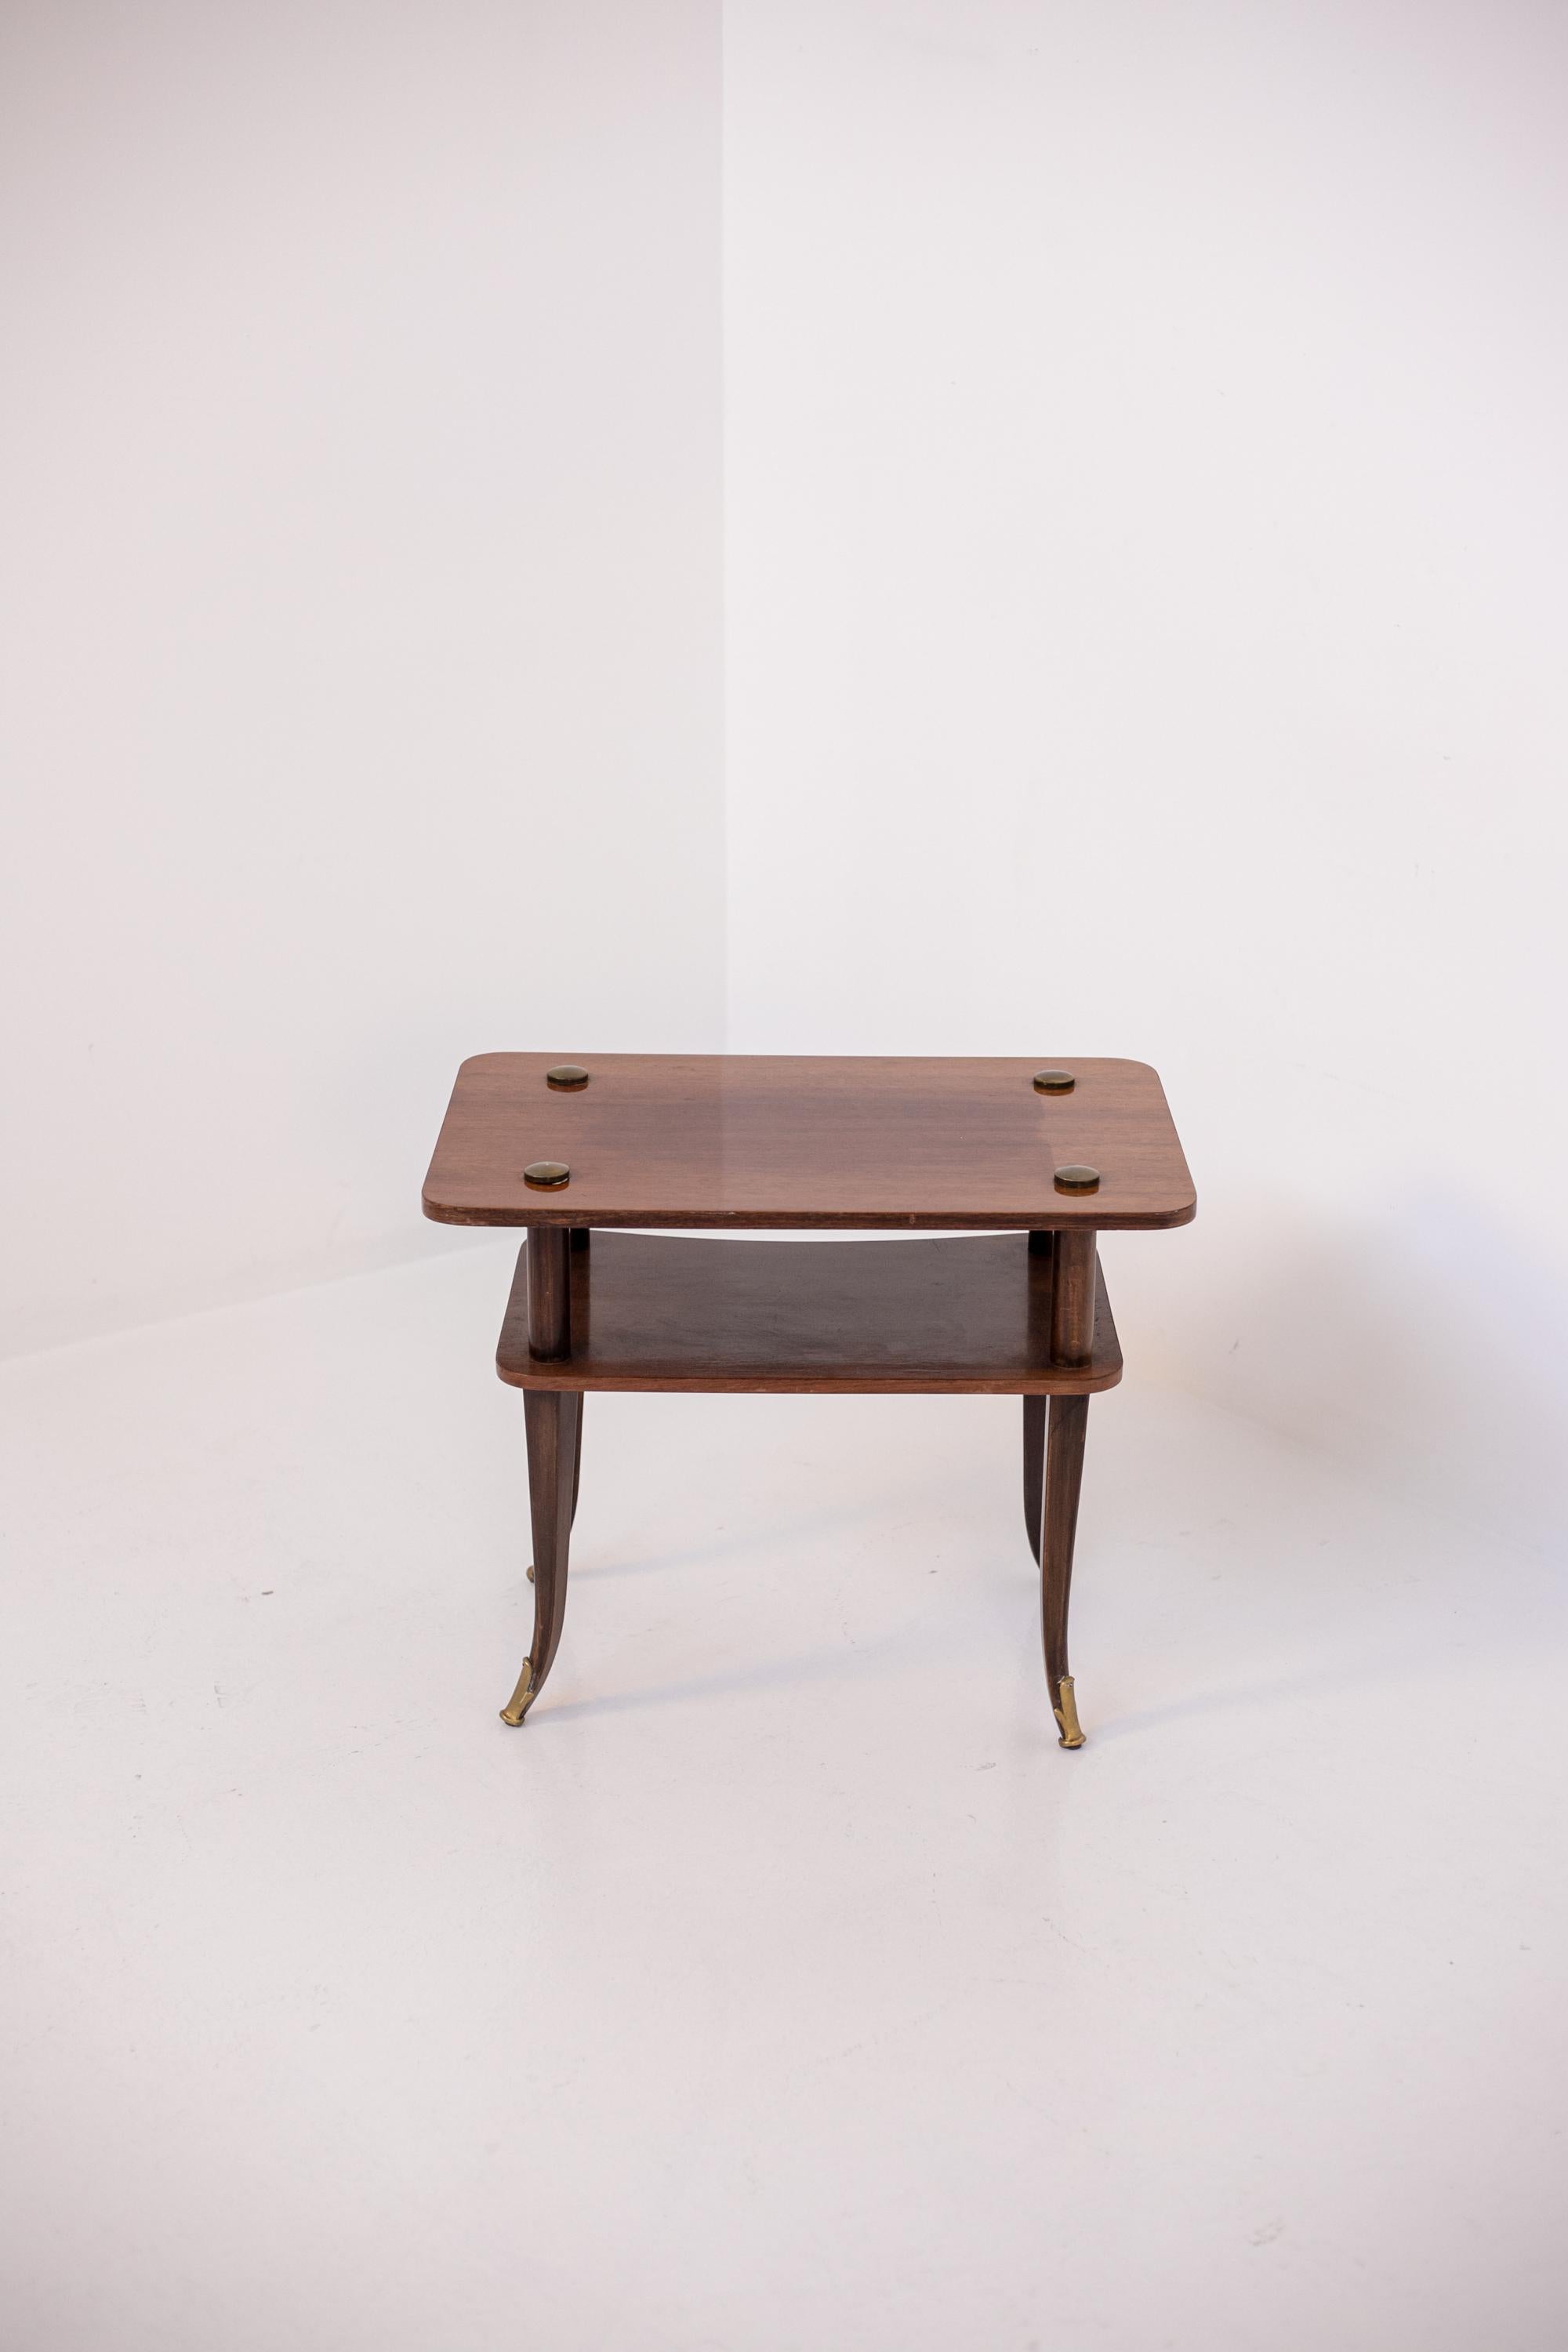 Lovely Italian wooden coffee table from the 1950s. The coffee table is made of wood with a rectangular shape. The peculiarity of the coffee table is in its realization with two shelves with its four legs slightly curved down outward. The feet of the